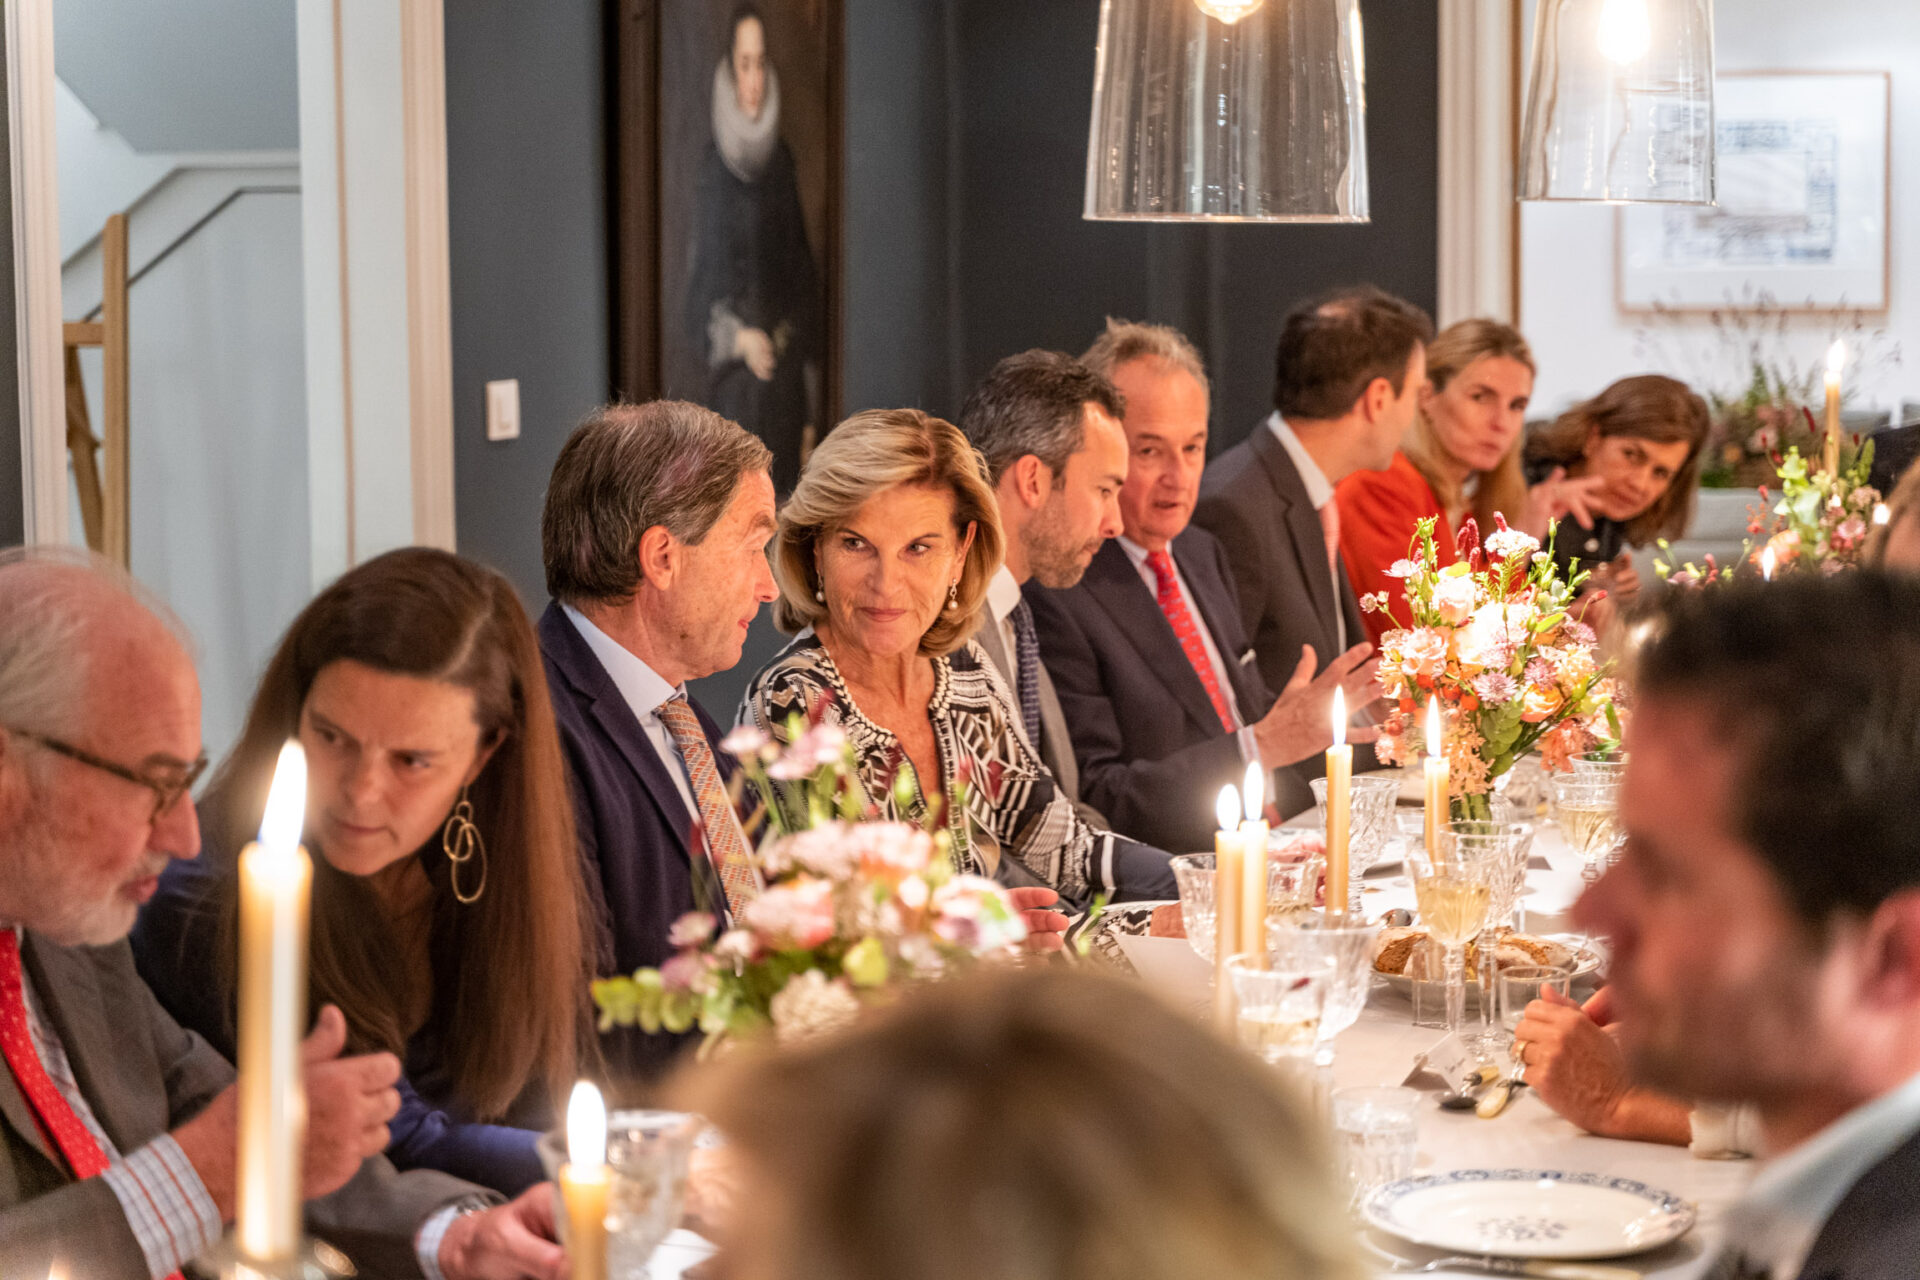 Exceptional Dinner in the presence of our guests and two amazing paintings from Van Dyck and Brueghel.